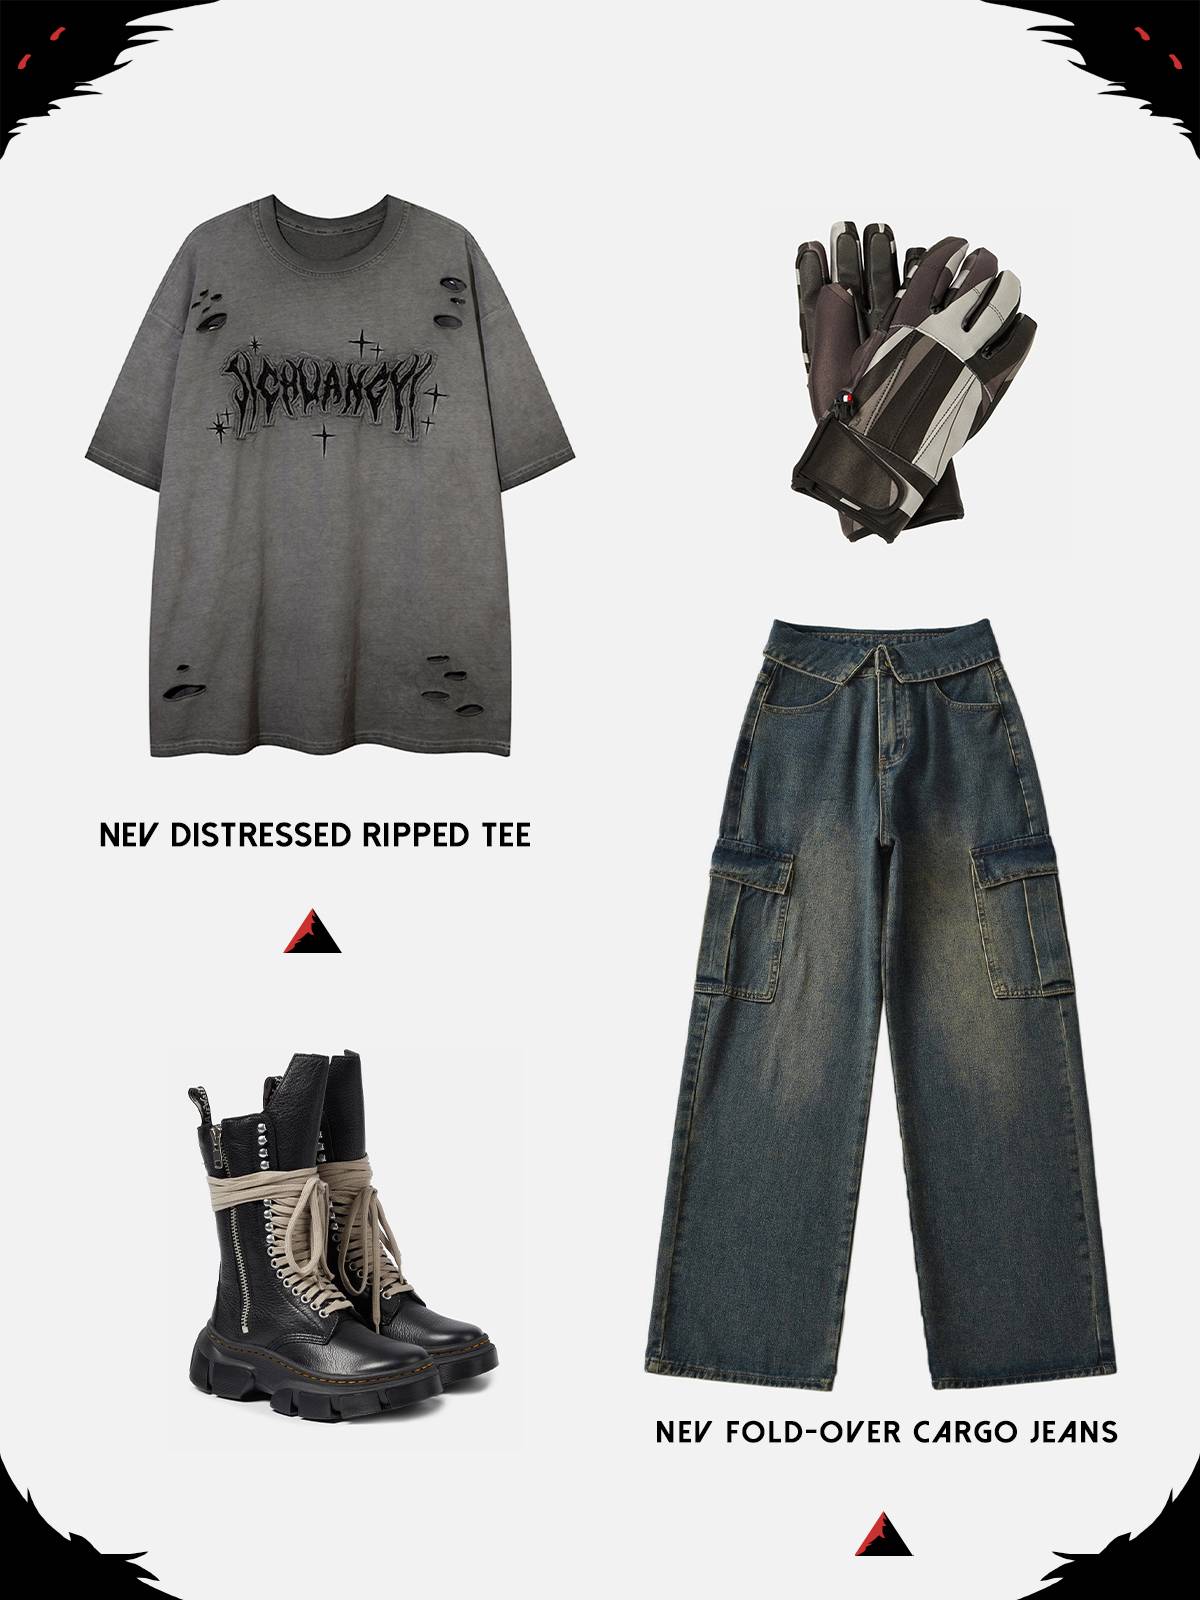 NEV Distressed Ripped Tee